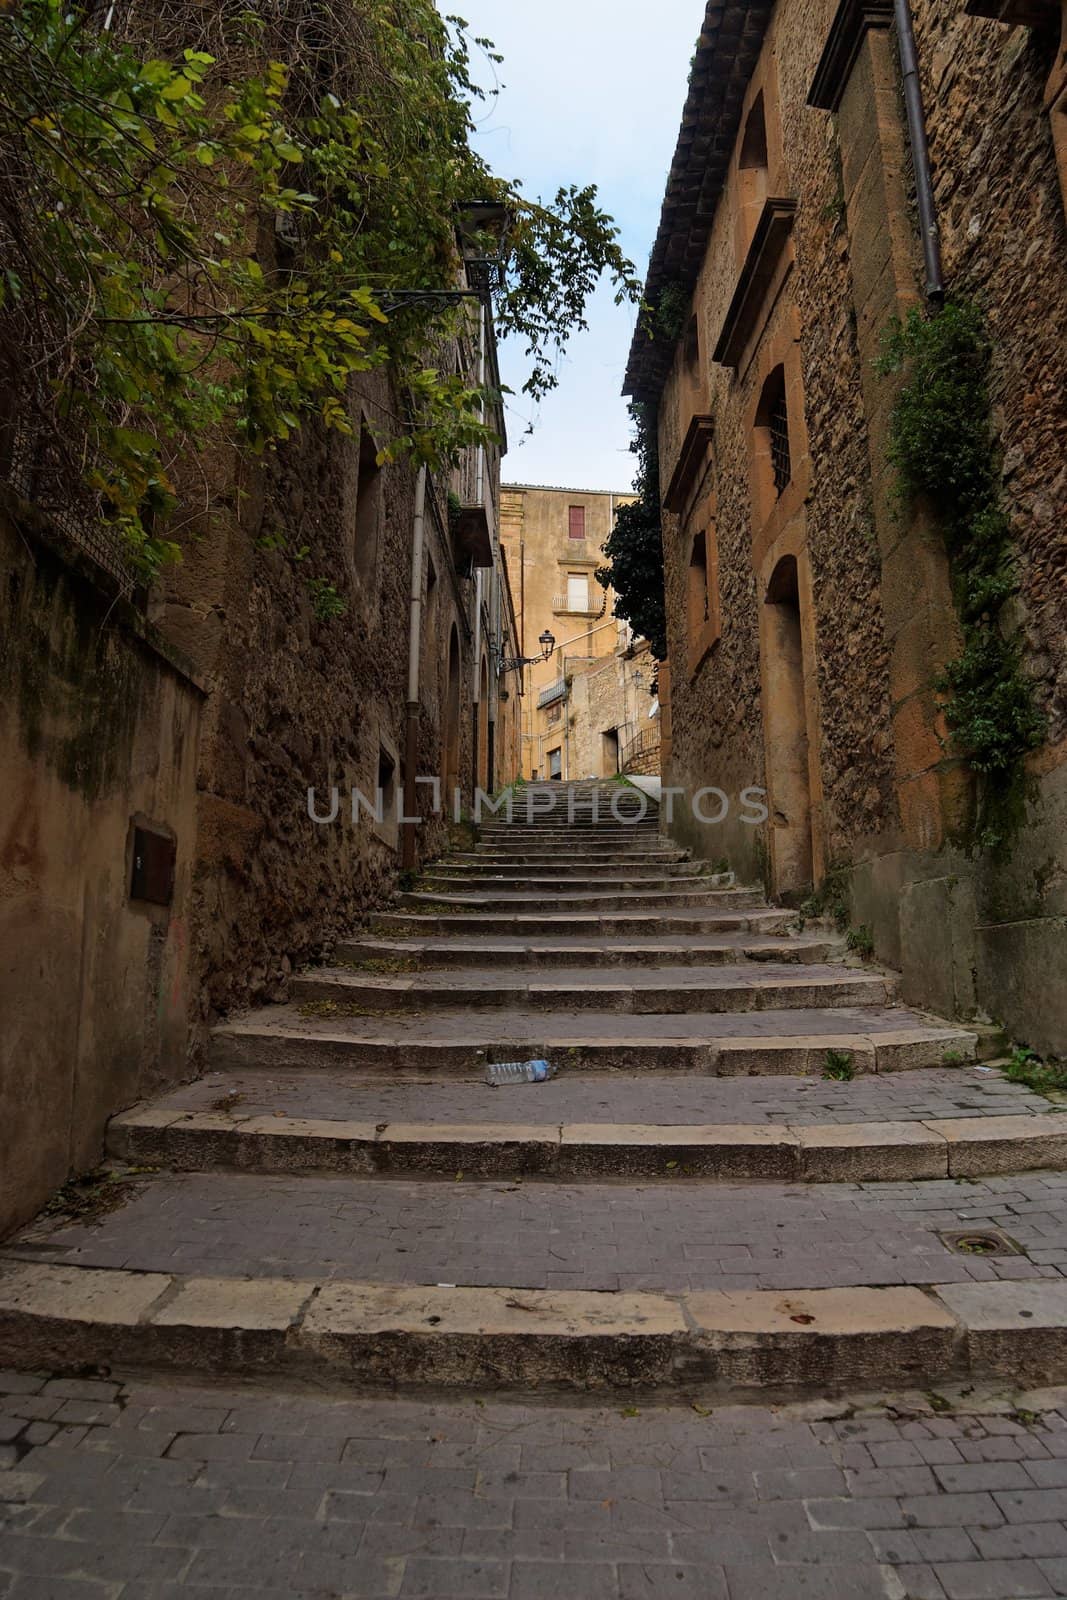 Narrow street with staircase in Piazza Armerina town, Sicily, Italy